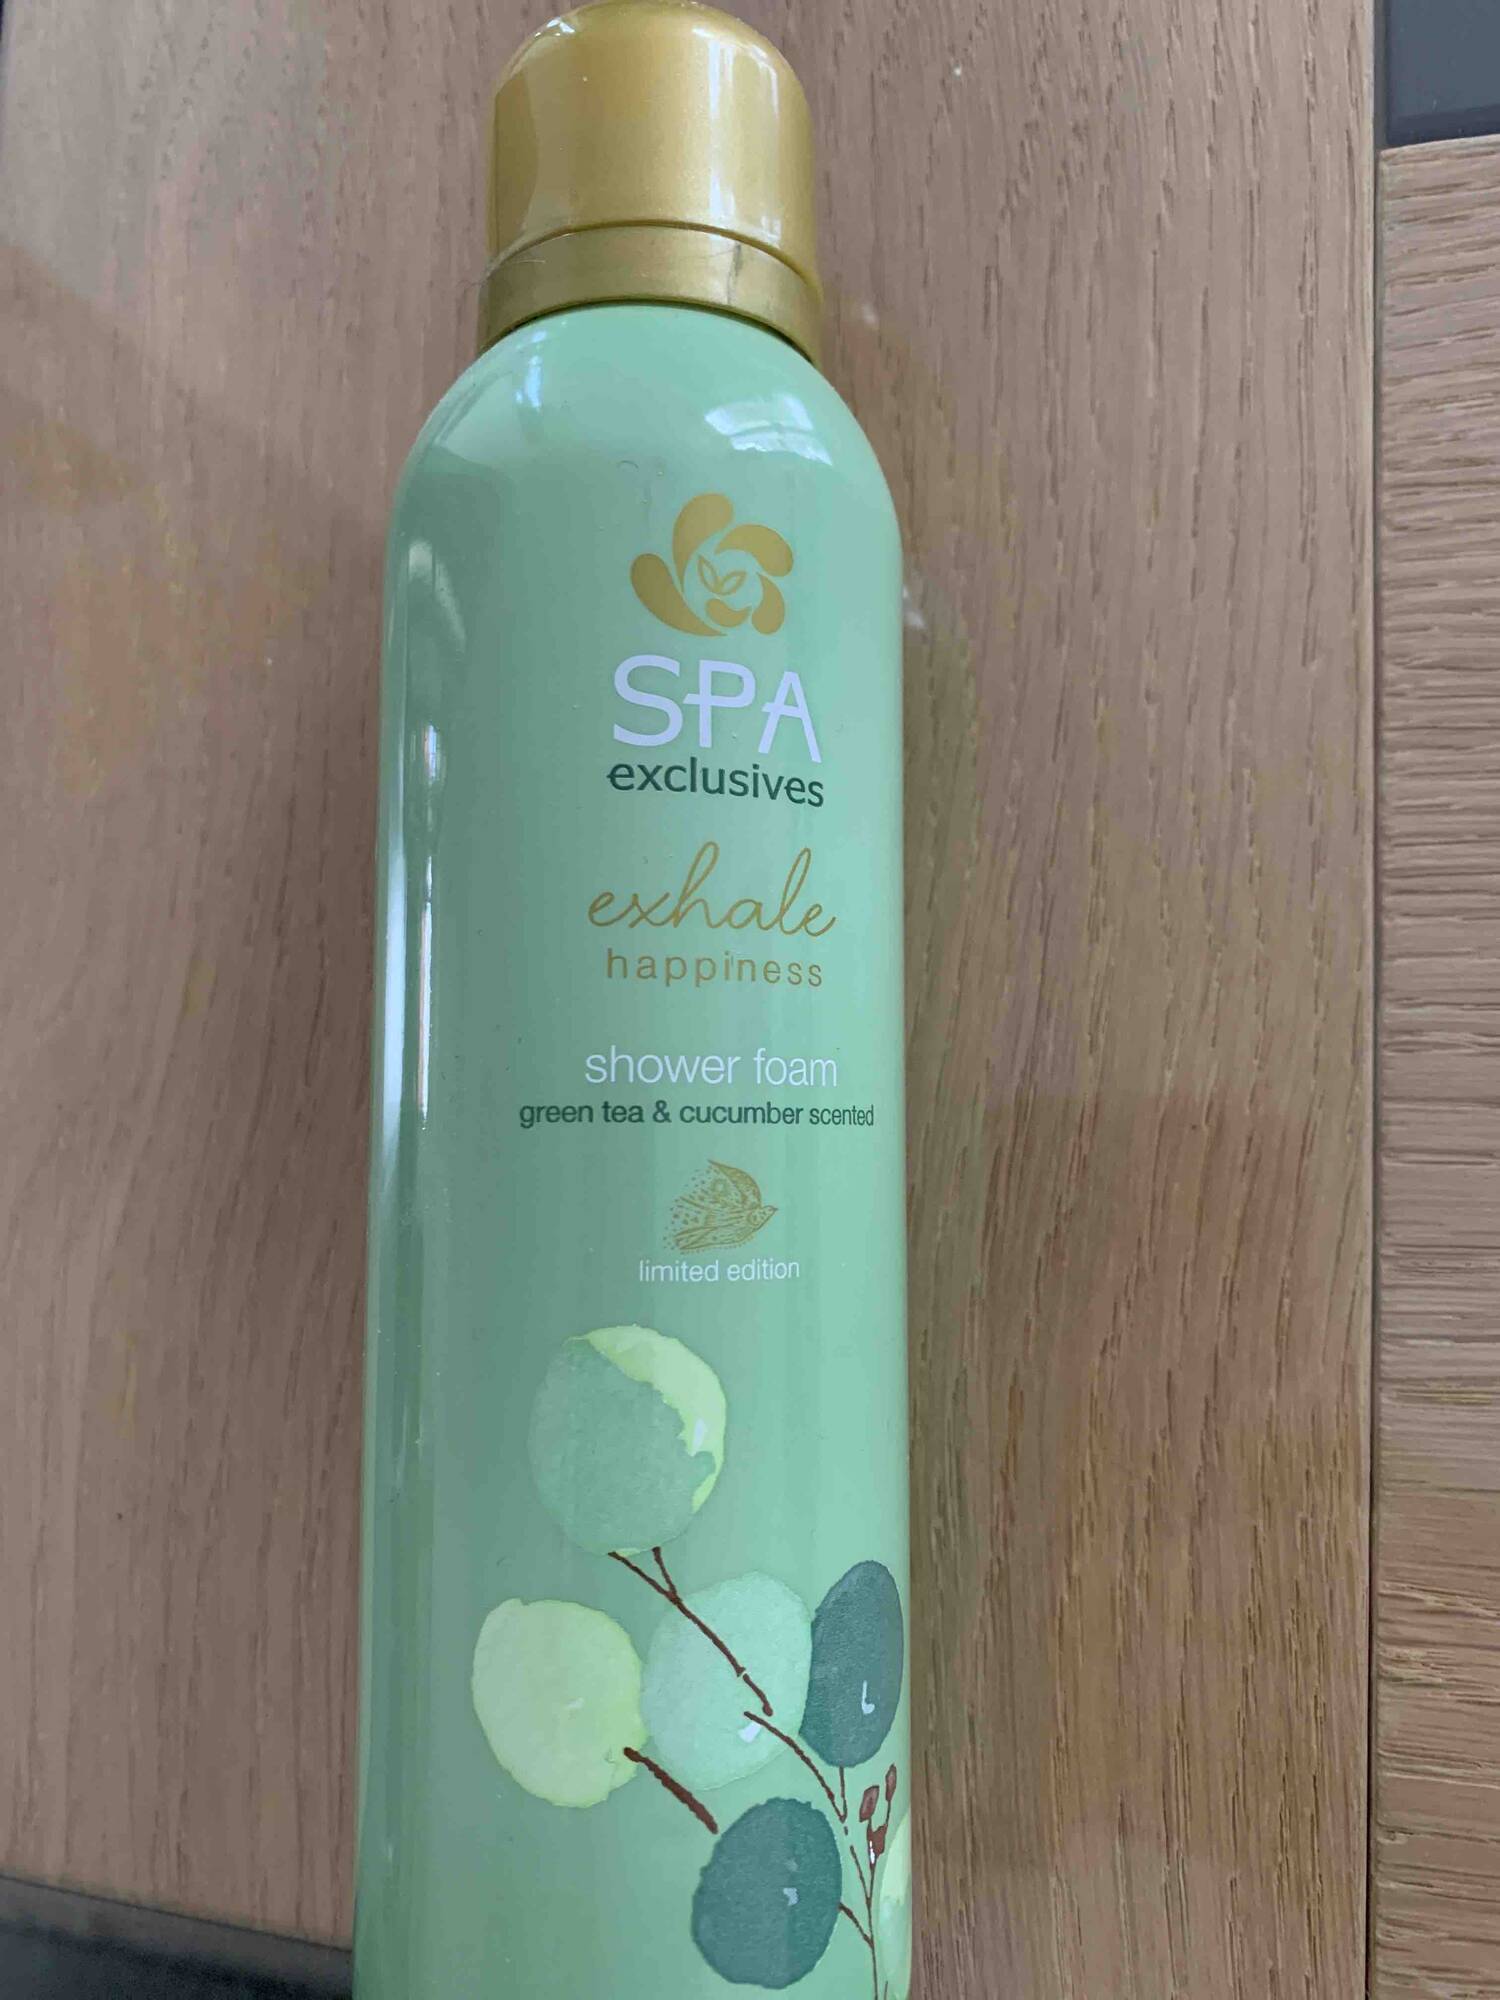 SPA EXCLUSIVES - Exhale happiness - Shower foam